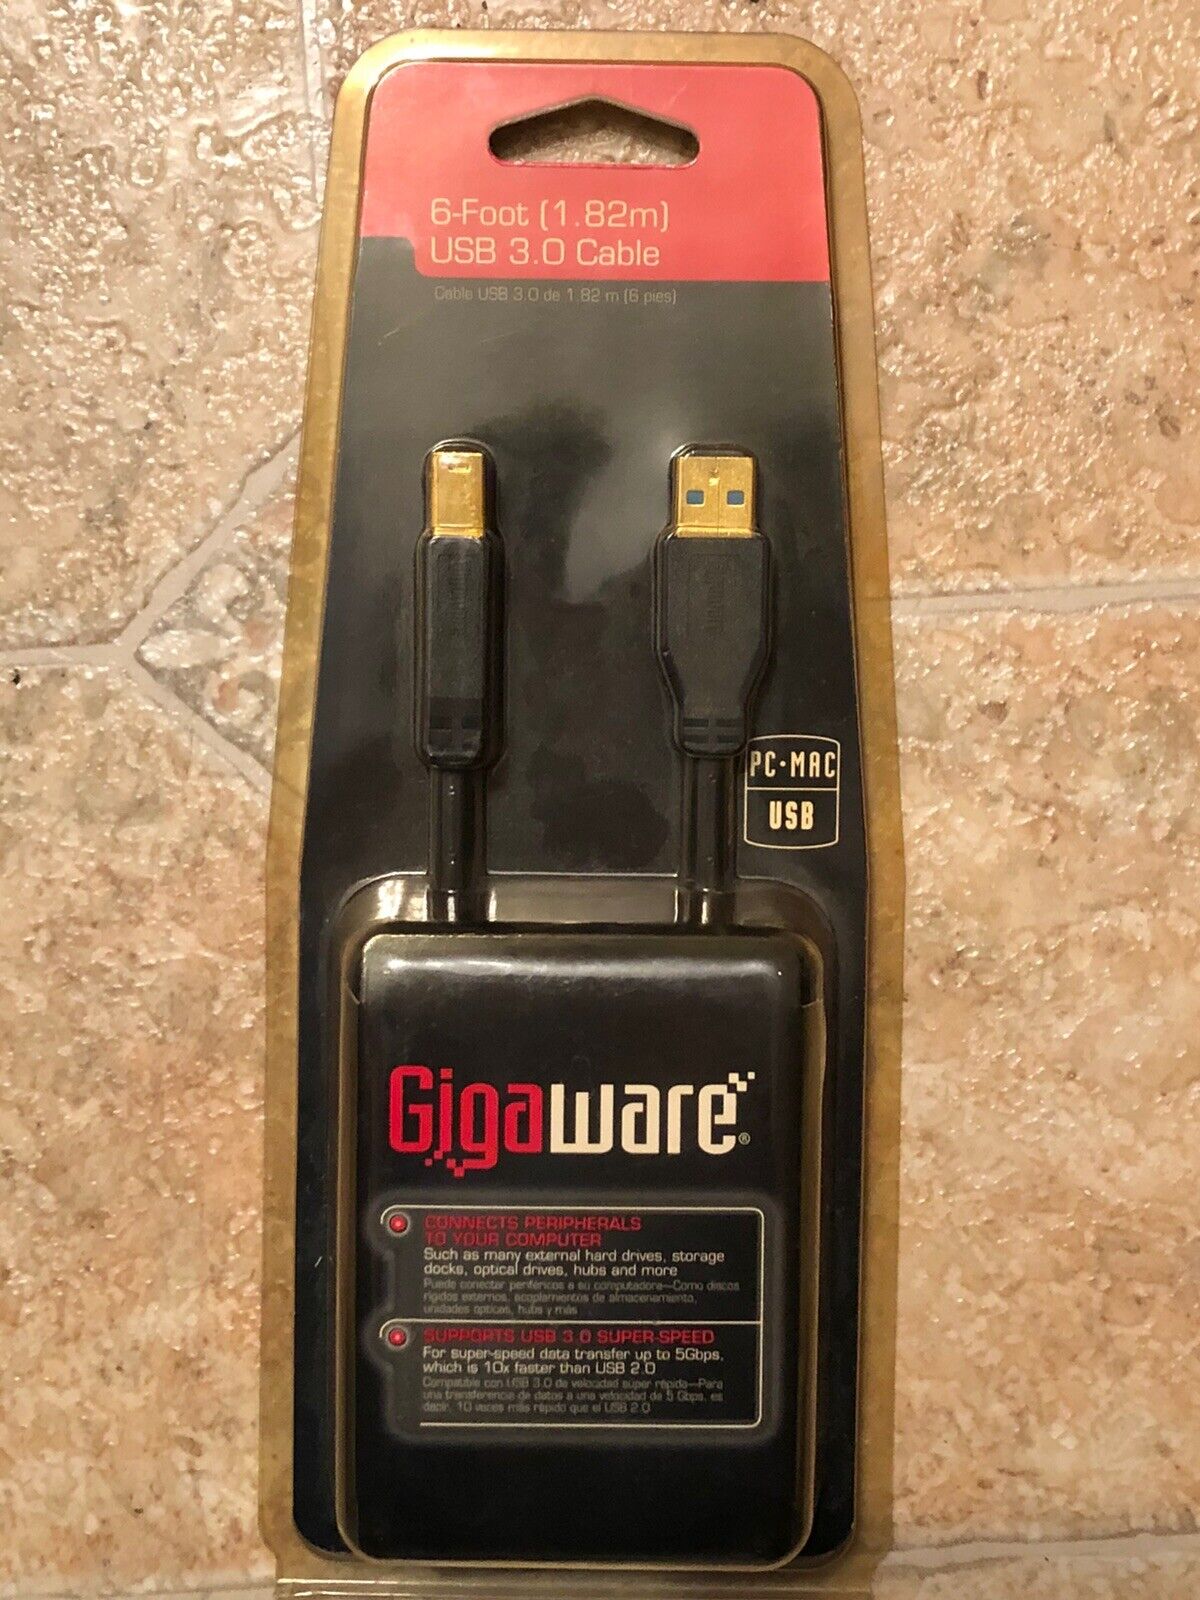 GIGAWARE 2601524 6-FT. USB 3.0 CABLE NEW IN package